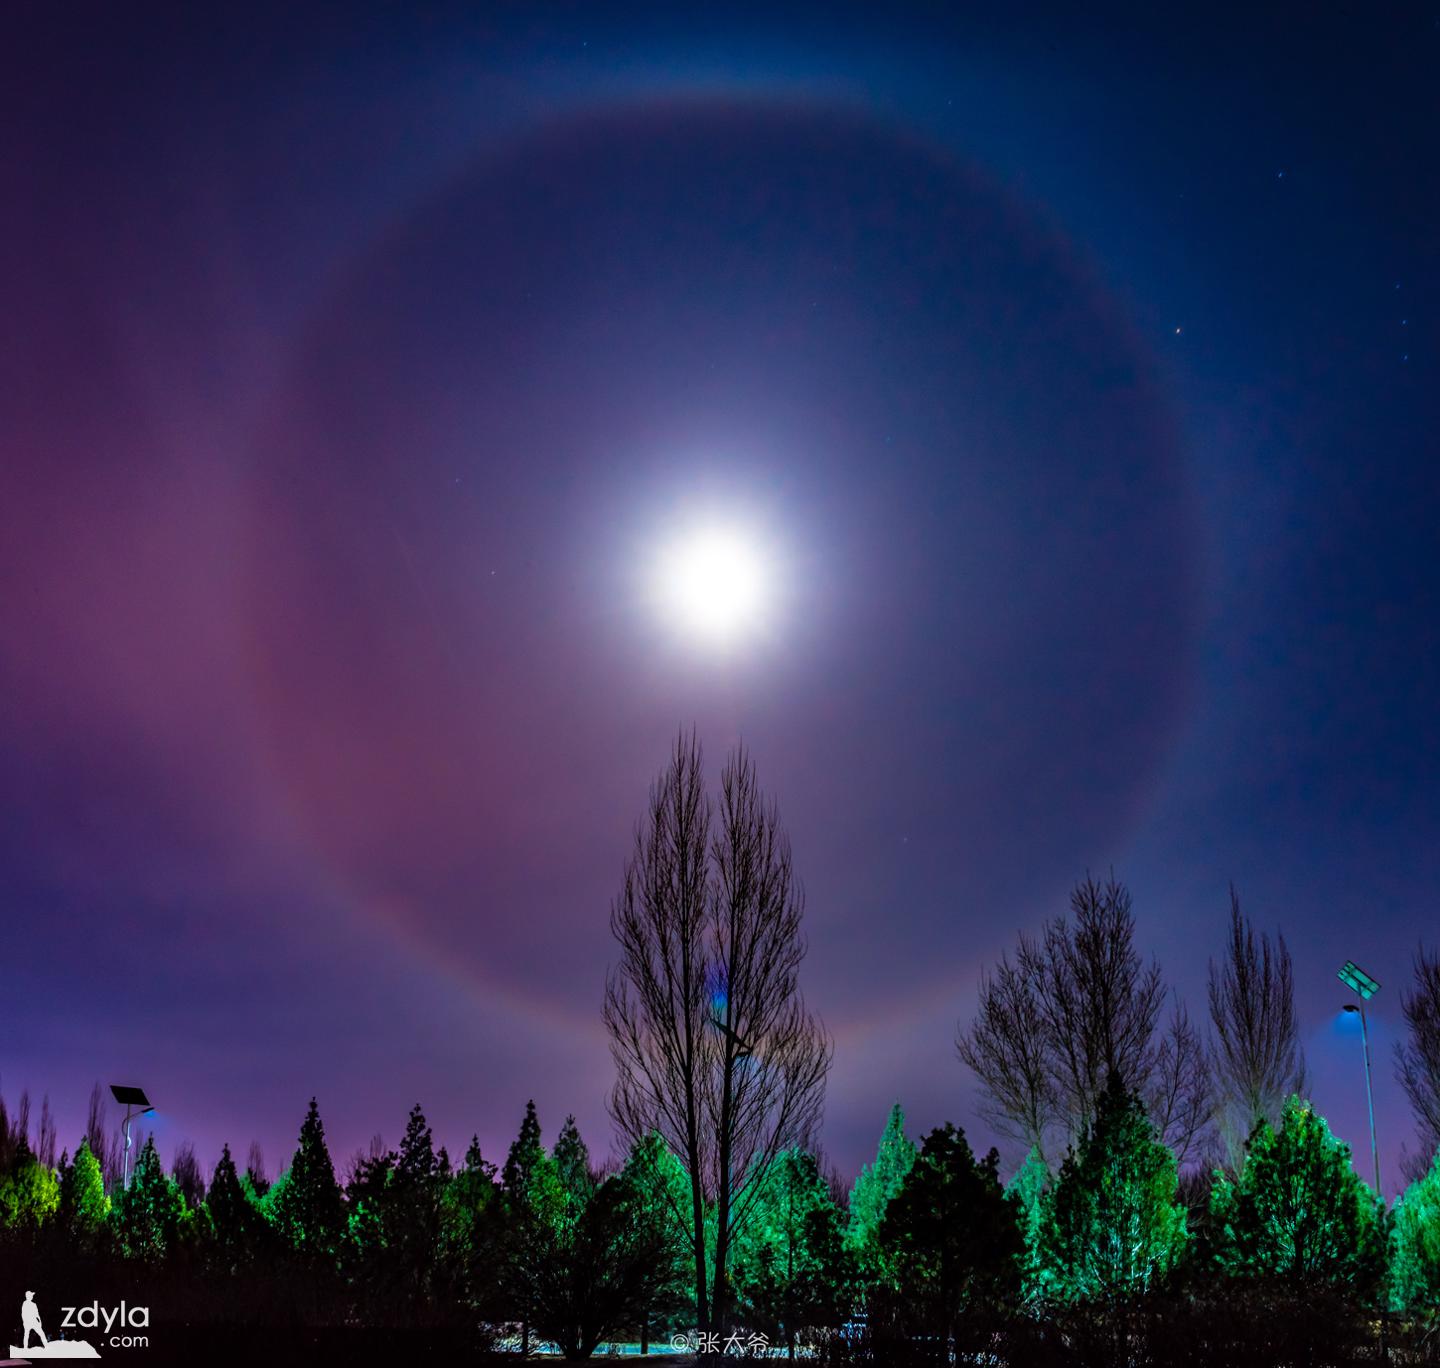 Moon Halo in my hometown